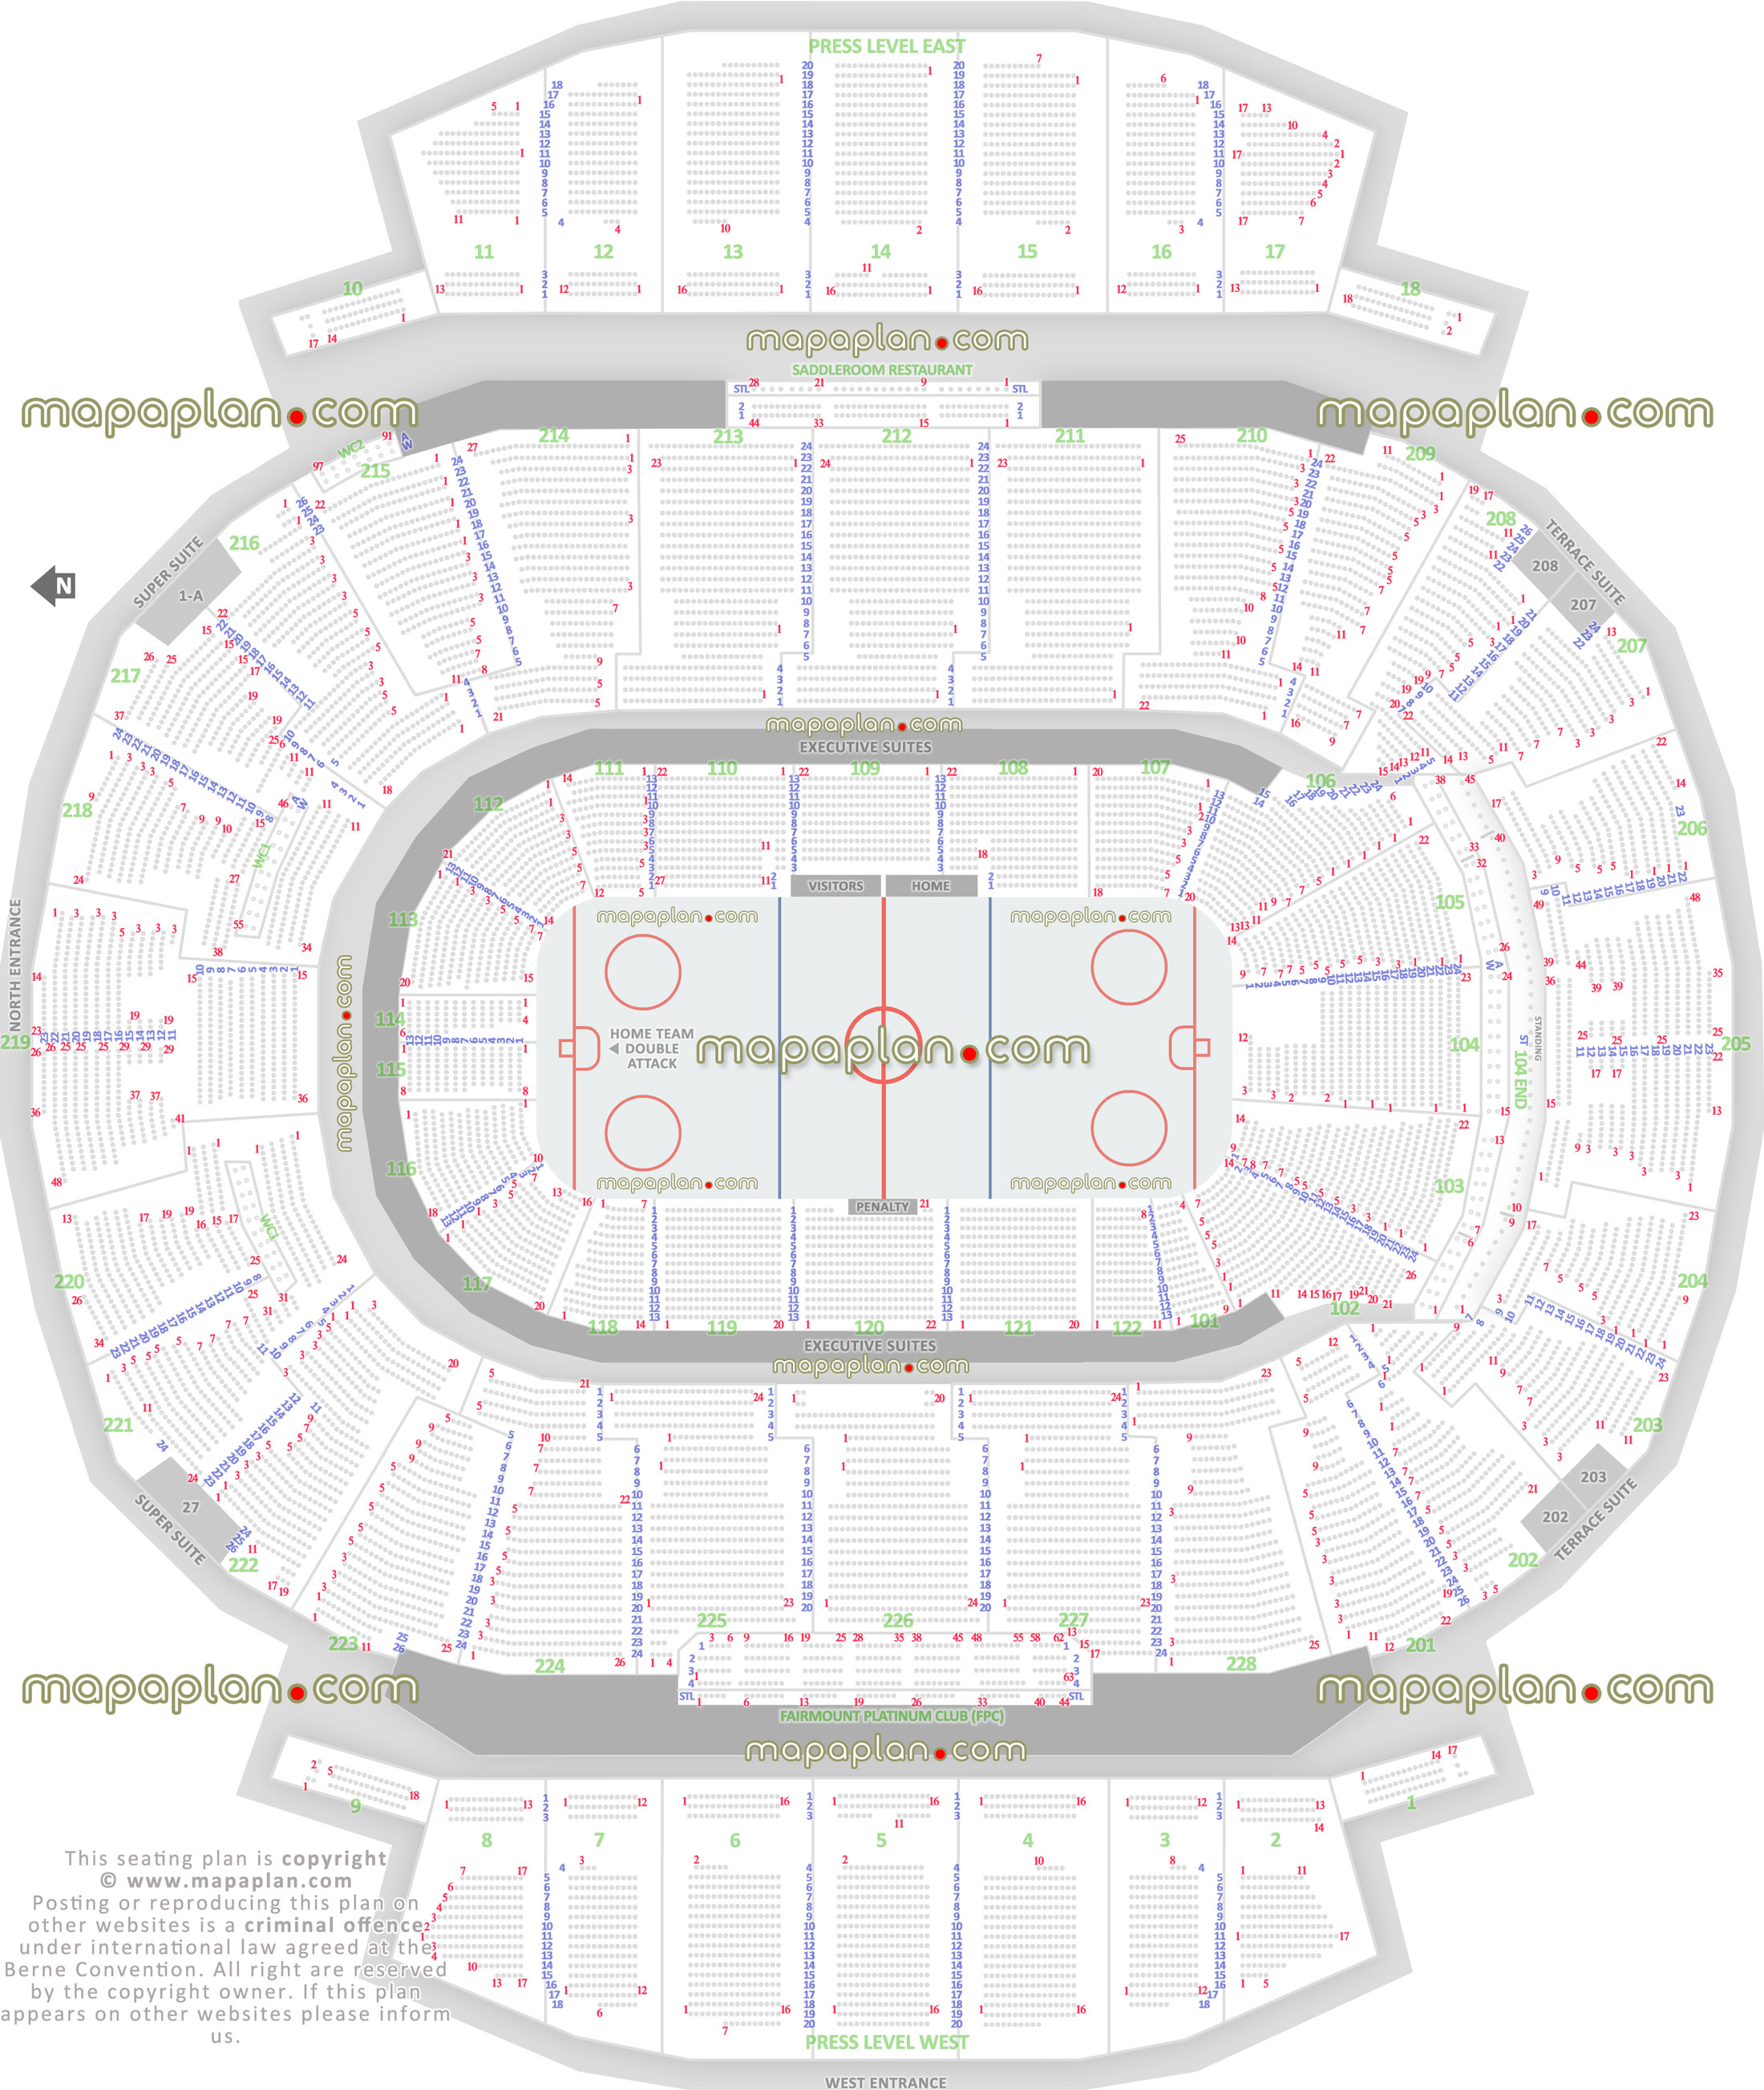 hockey plan calgary flames nhl hitmen games arena stadium diagram individual find seat locator seats row best seats rows numbered upper press level level 2 platinum club lower level sections 101 102 103 104 105 106 107 108 109 110 111 112 113 114 115 116 117 118 119 120 121 122 Calgary Scotiabank Saddledome seating chart